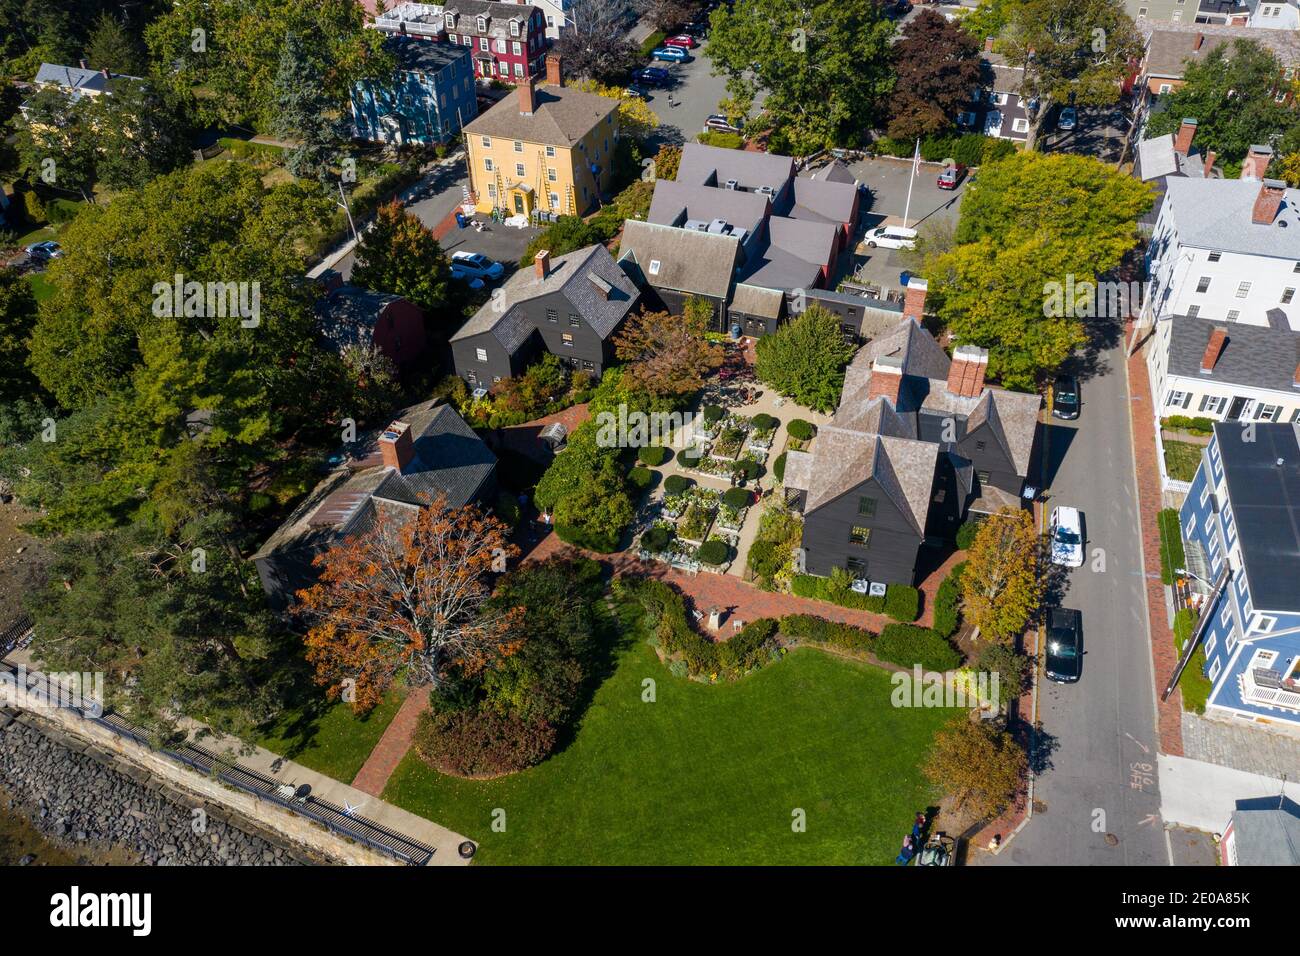 The House of the Seven Gables, Salem, MA, USA Stock Photo